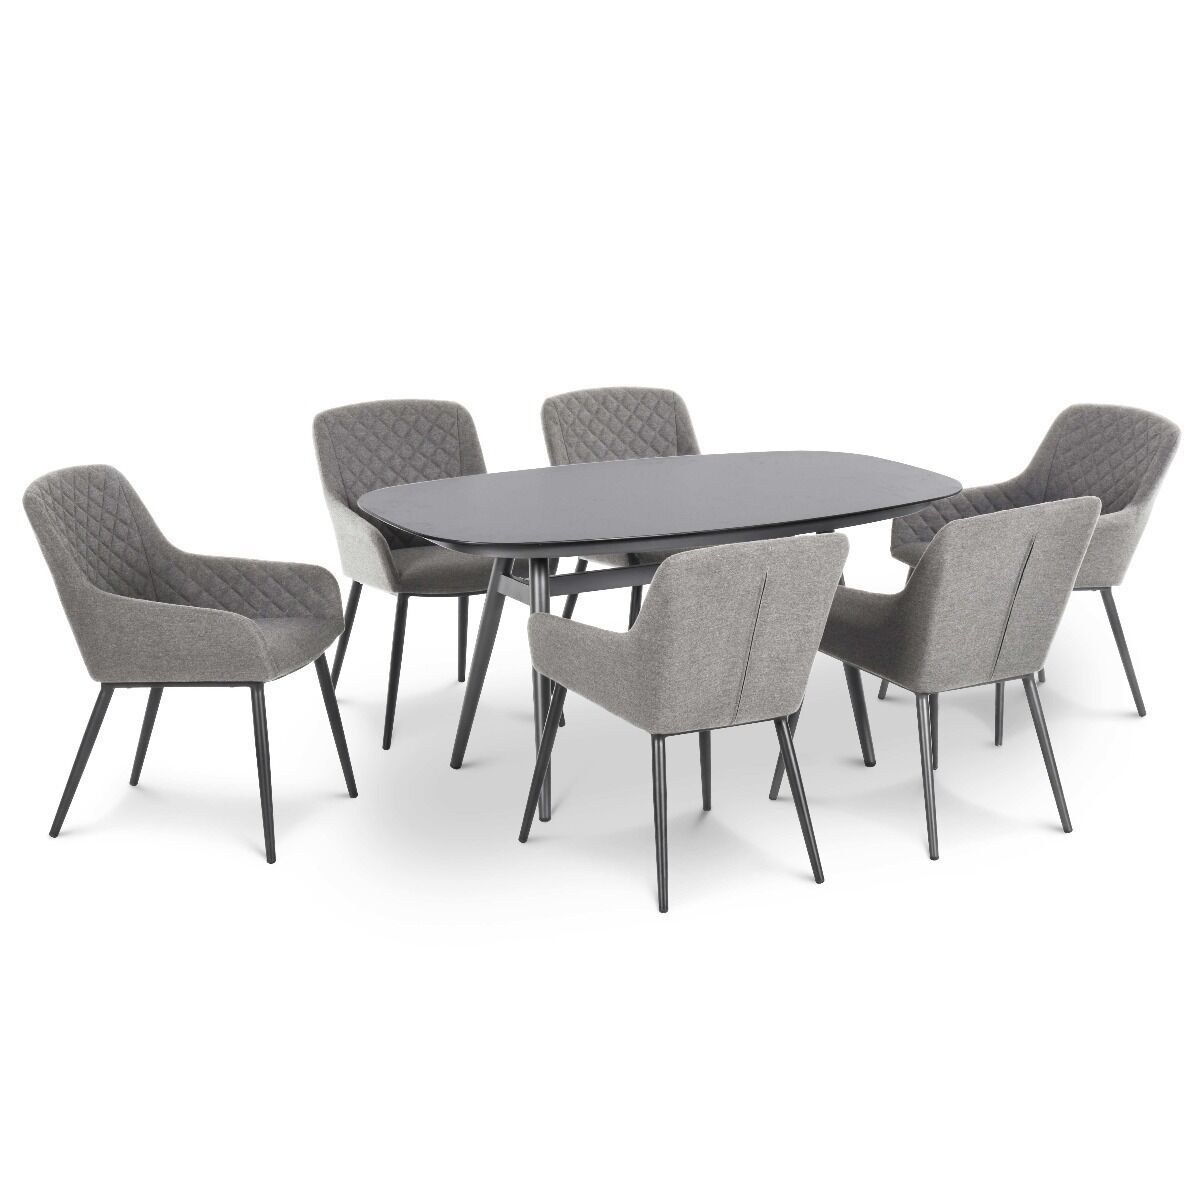 Maze - Outdoor Fabric Zest 6 Seat Oval Dining Set - Flanelle product image